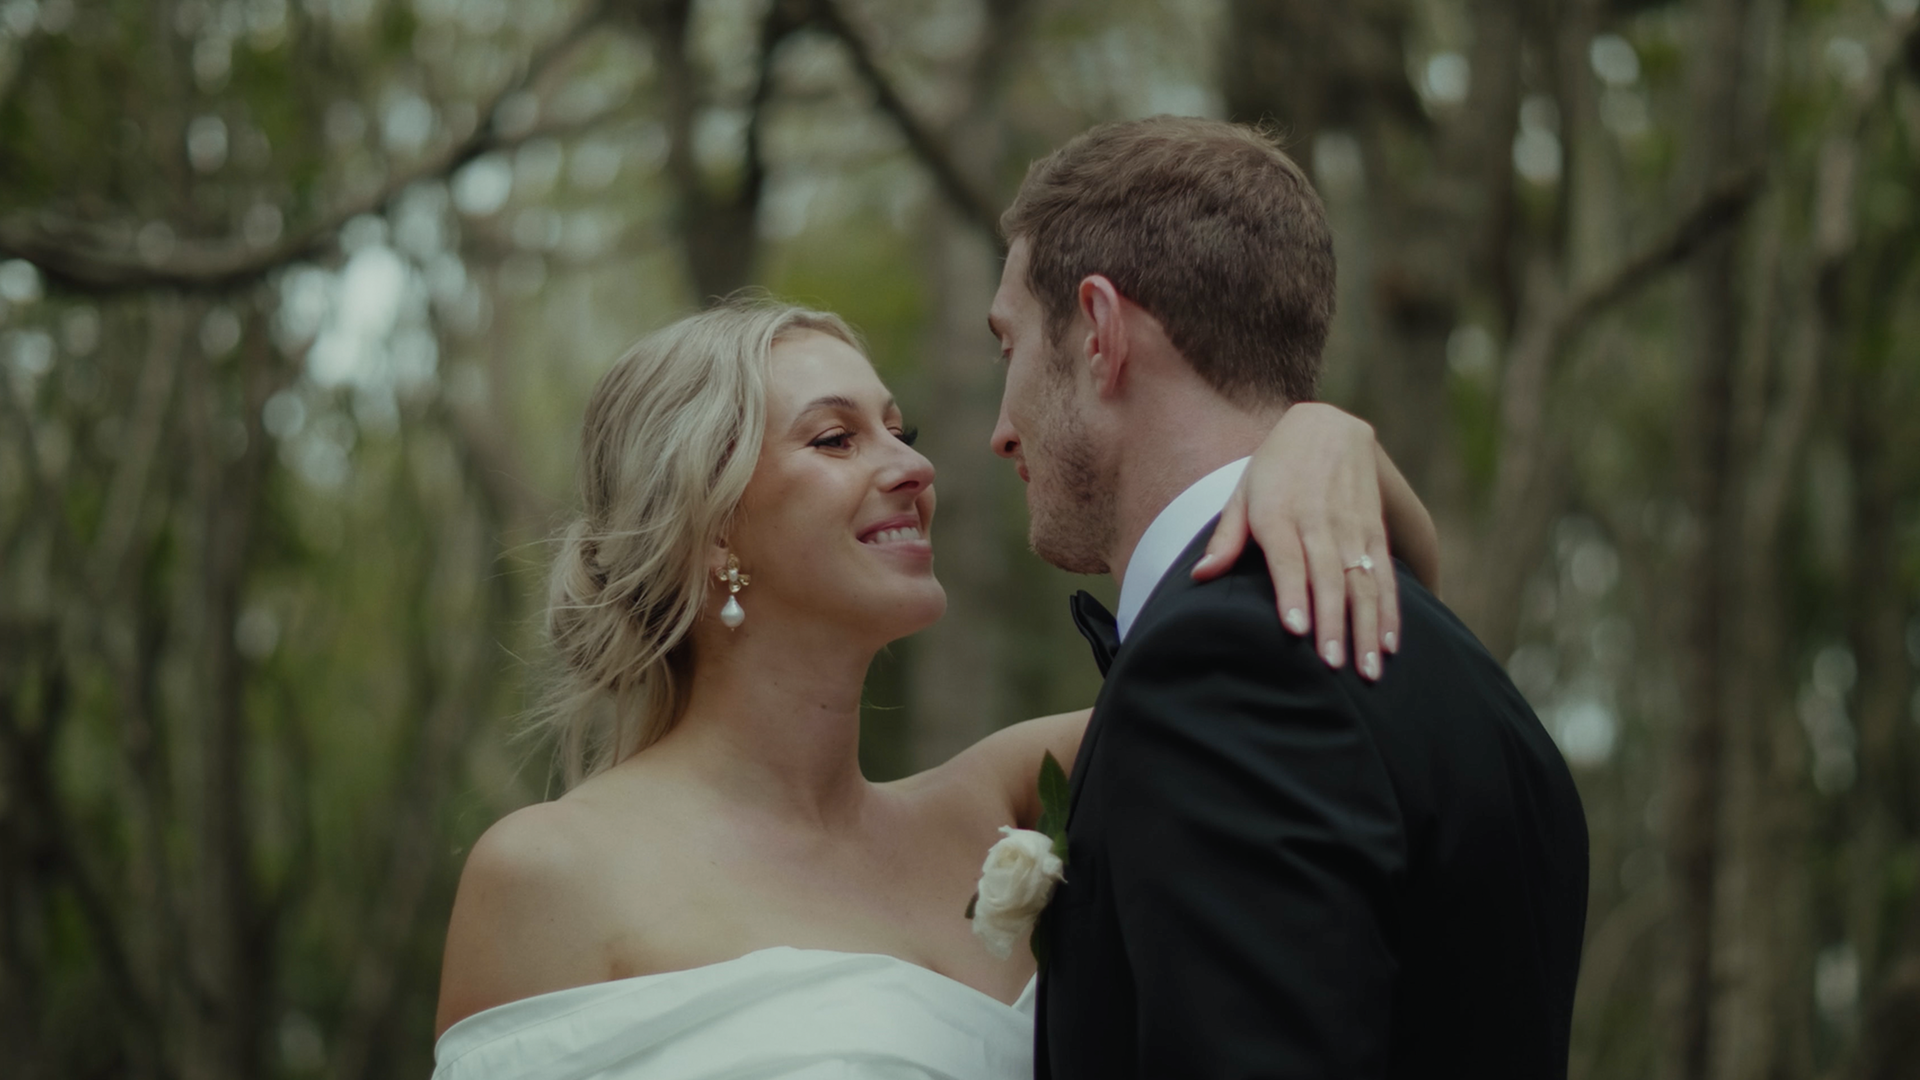 Wedding videography sydney and central coast